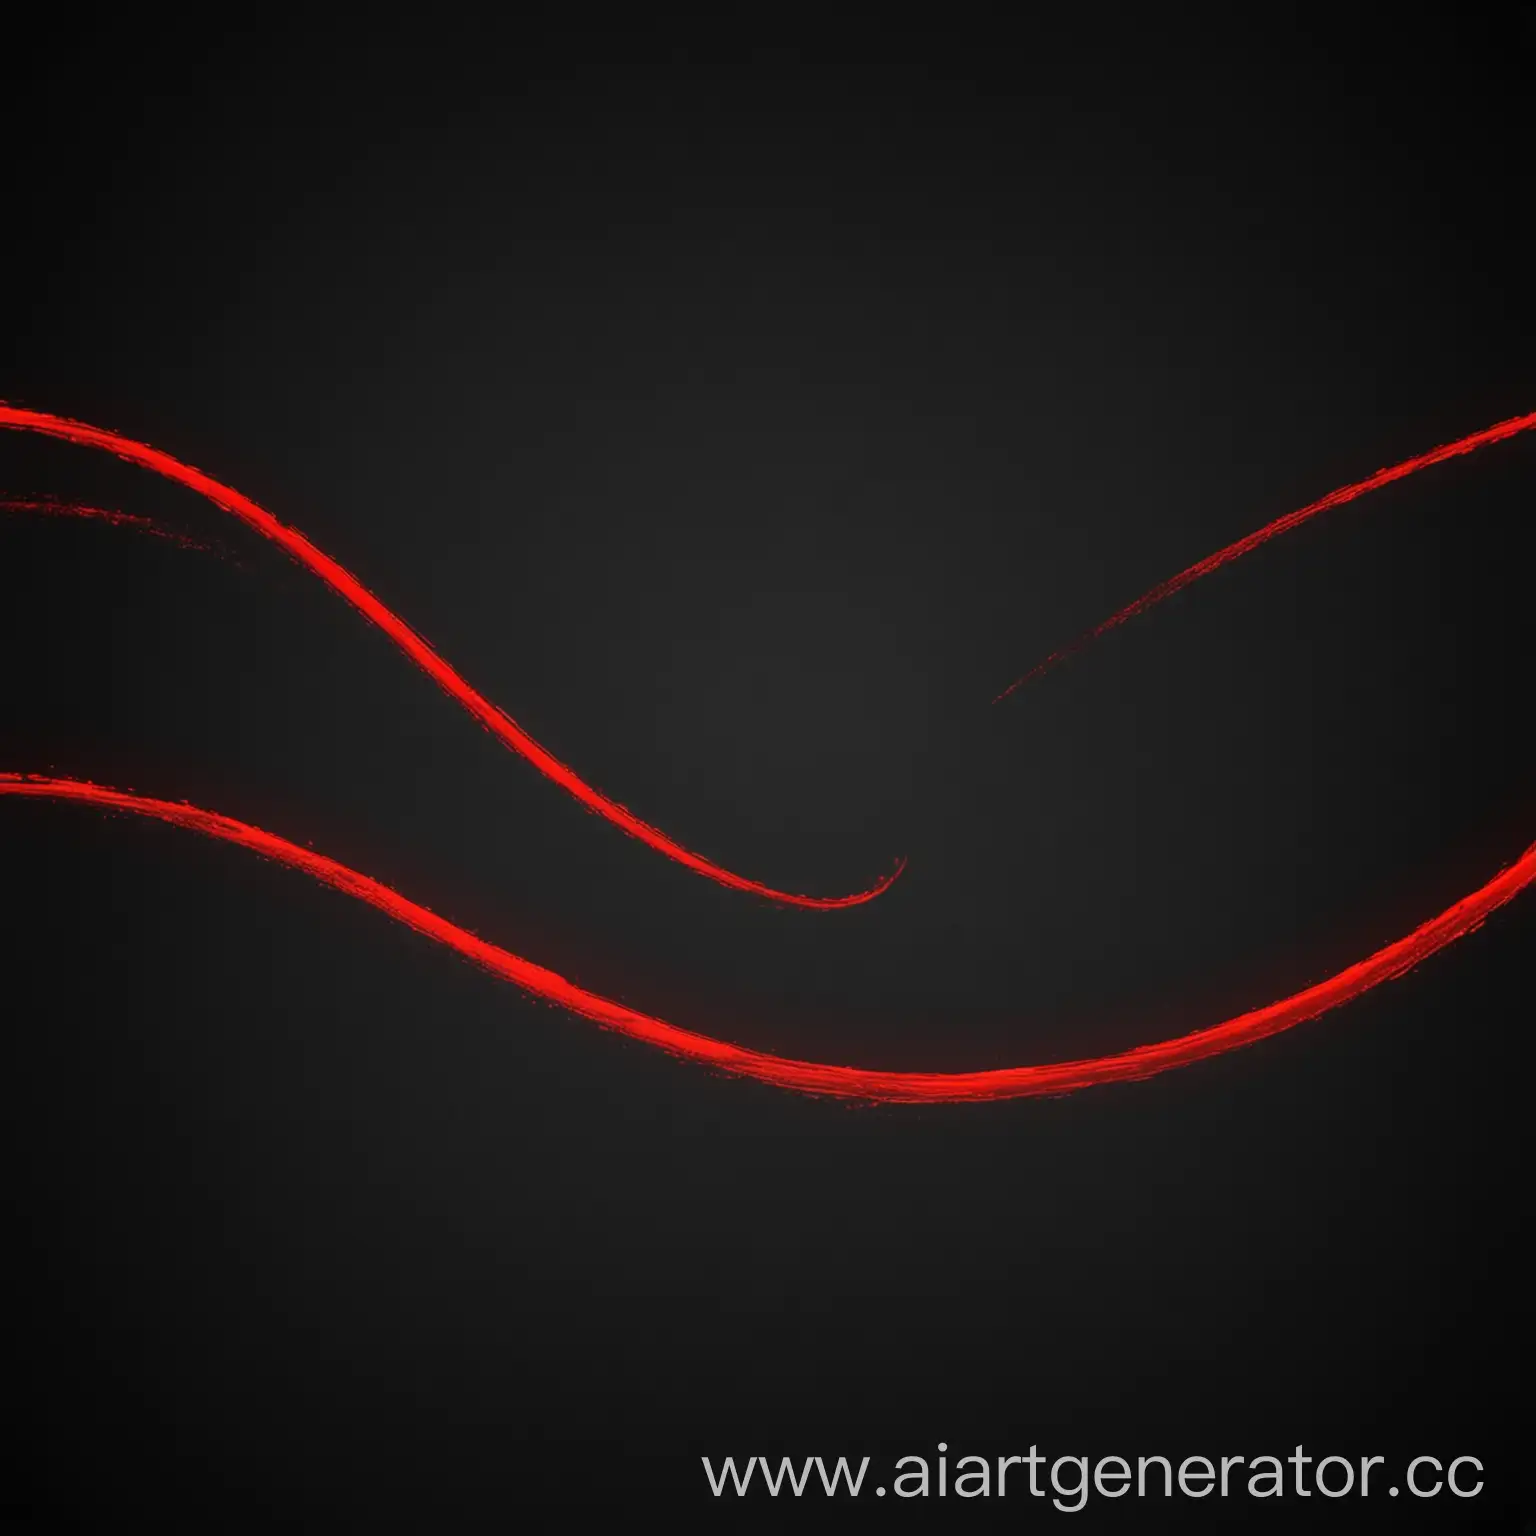 Dynamic-Red-Curved-Line-Art-on-Black-Background-in-4K-Resolution